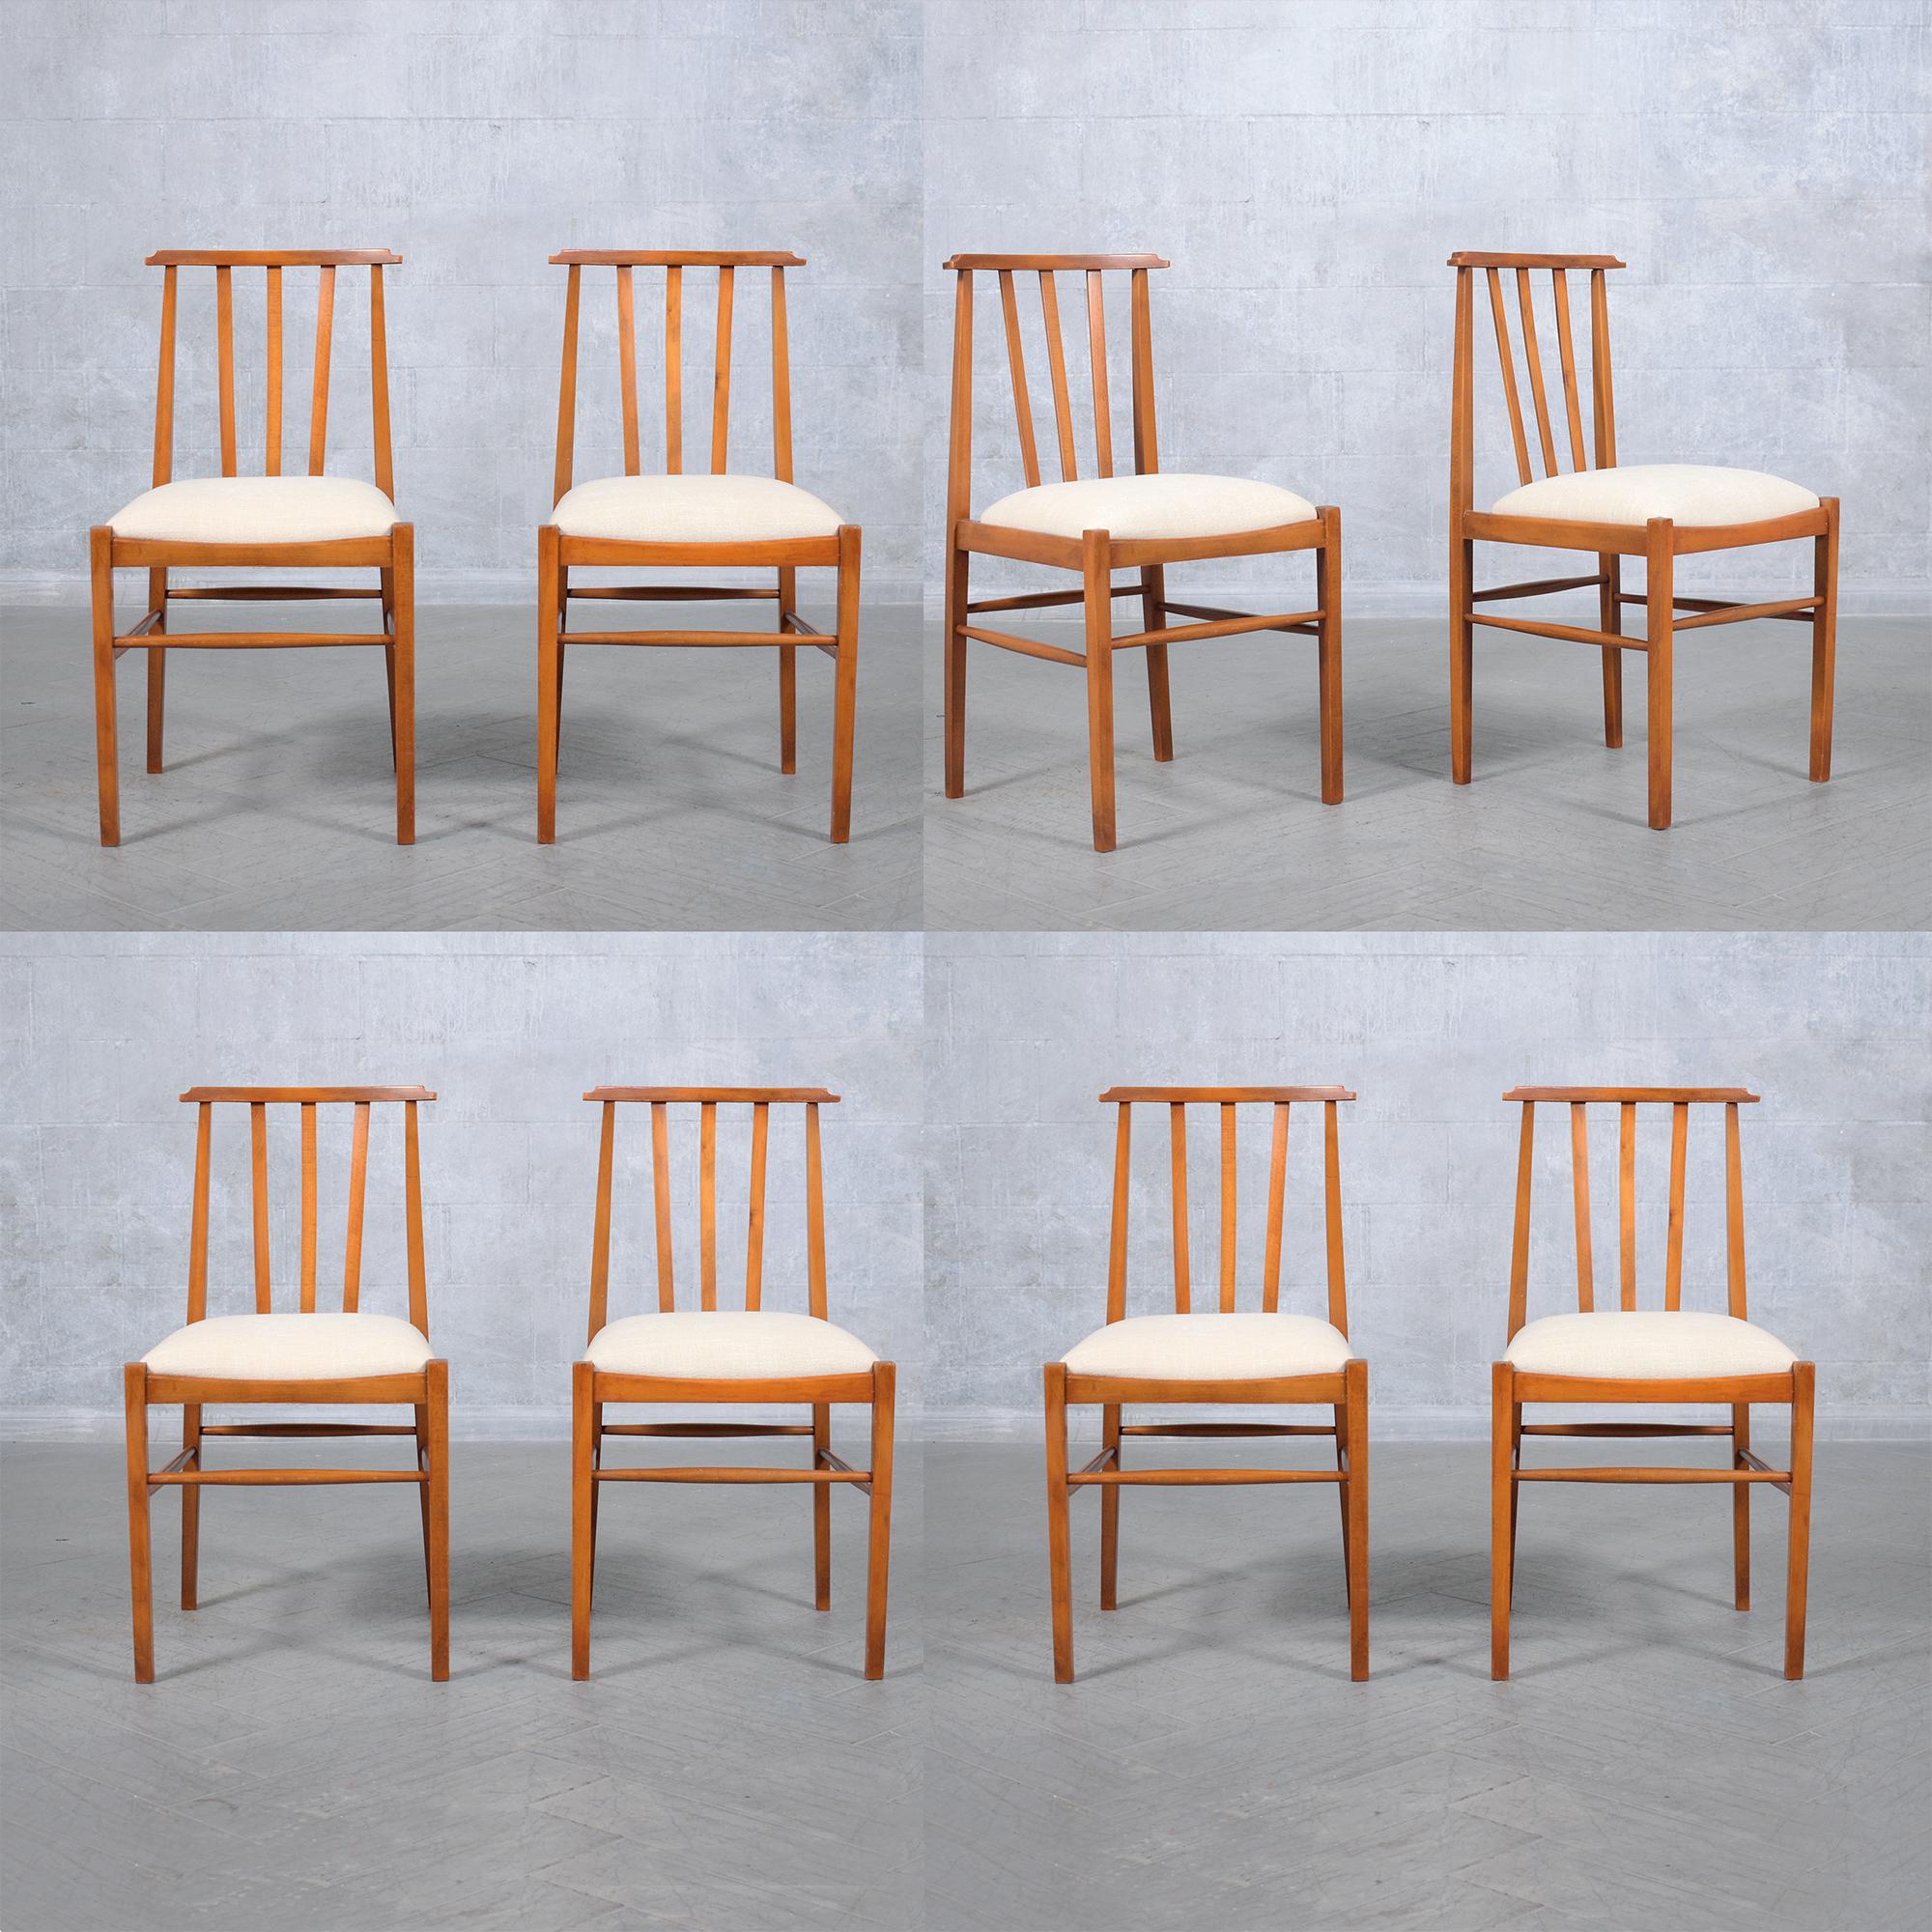 Américain 1960s Vintage Modernity Dining Chairs Set of Eight - Expertly Restored (en anglais) en vente